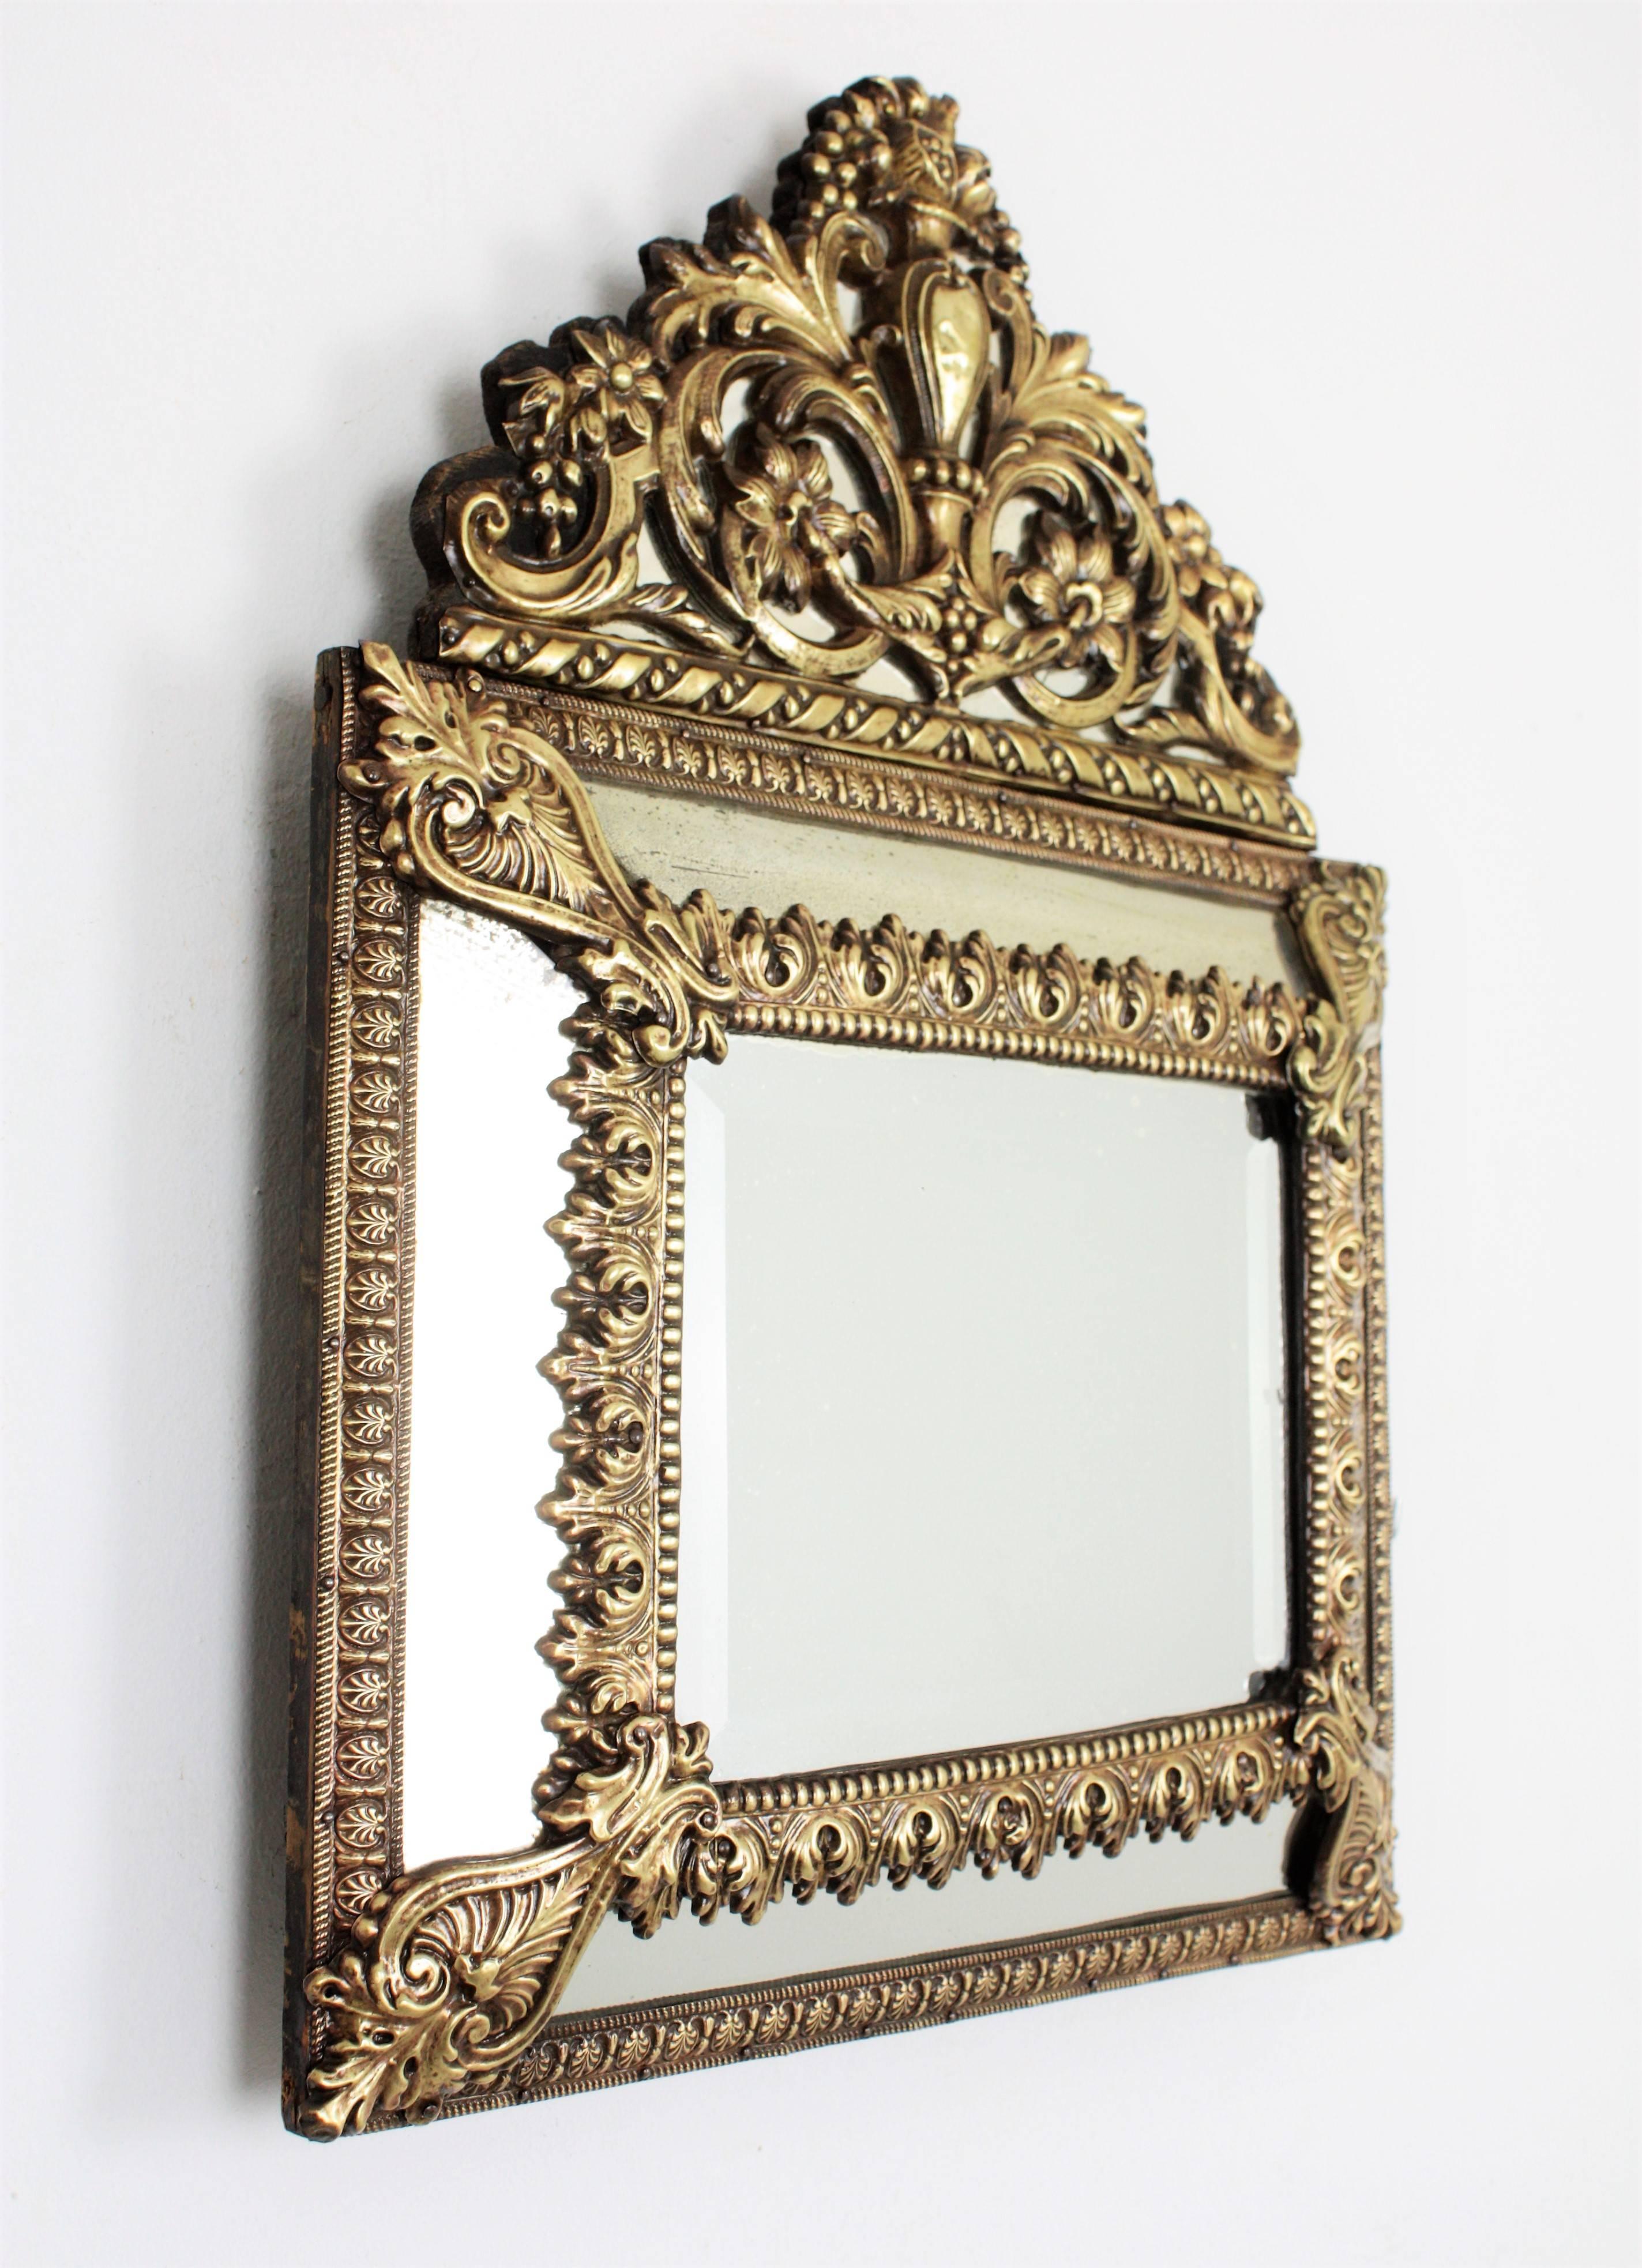 An elegant Napoleon III period mirror made with central beveled glass and four rectangular glasses joined between them by decorative brass repousse floral patterns, an elegant filigree repousse brass crest and sculptural Acanthus leaves adorning the